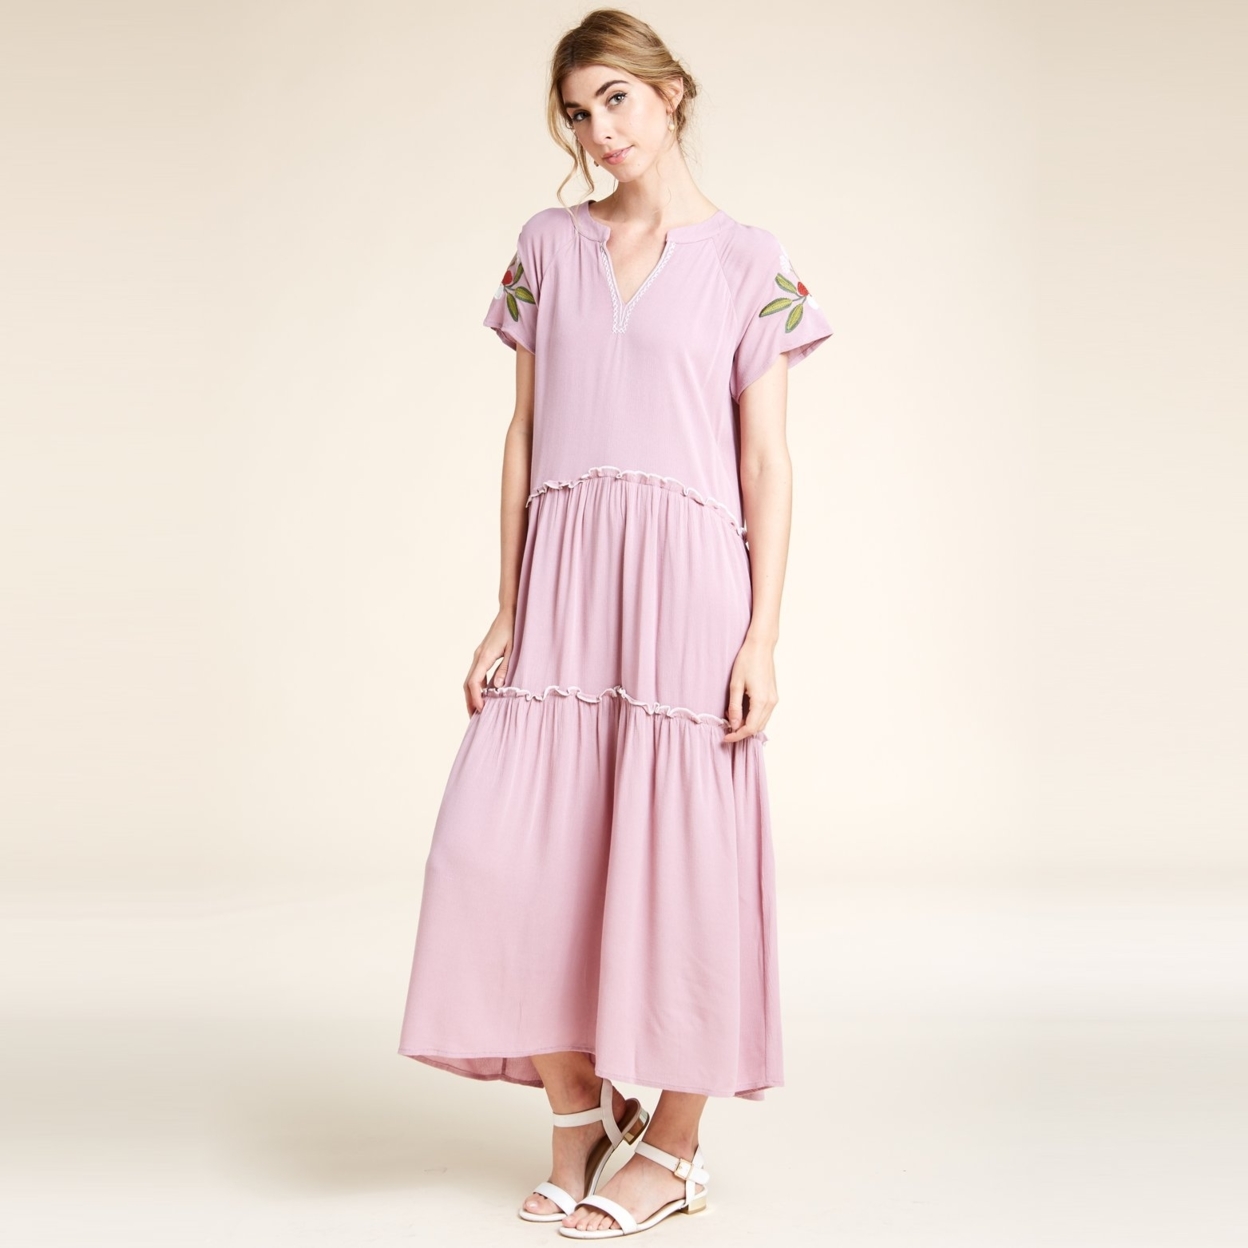 Embroidery Weekend Getaway Dress - Pink, Small (2-6)